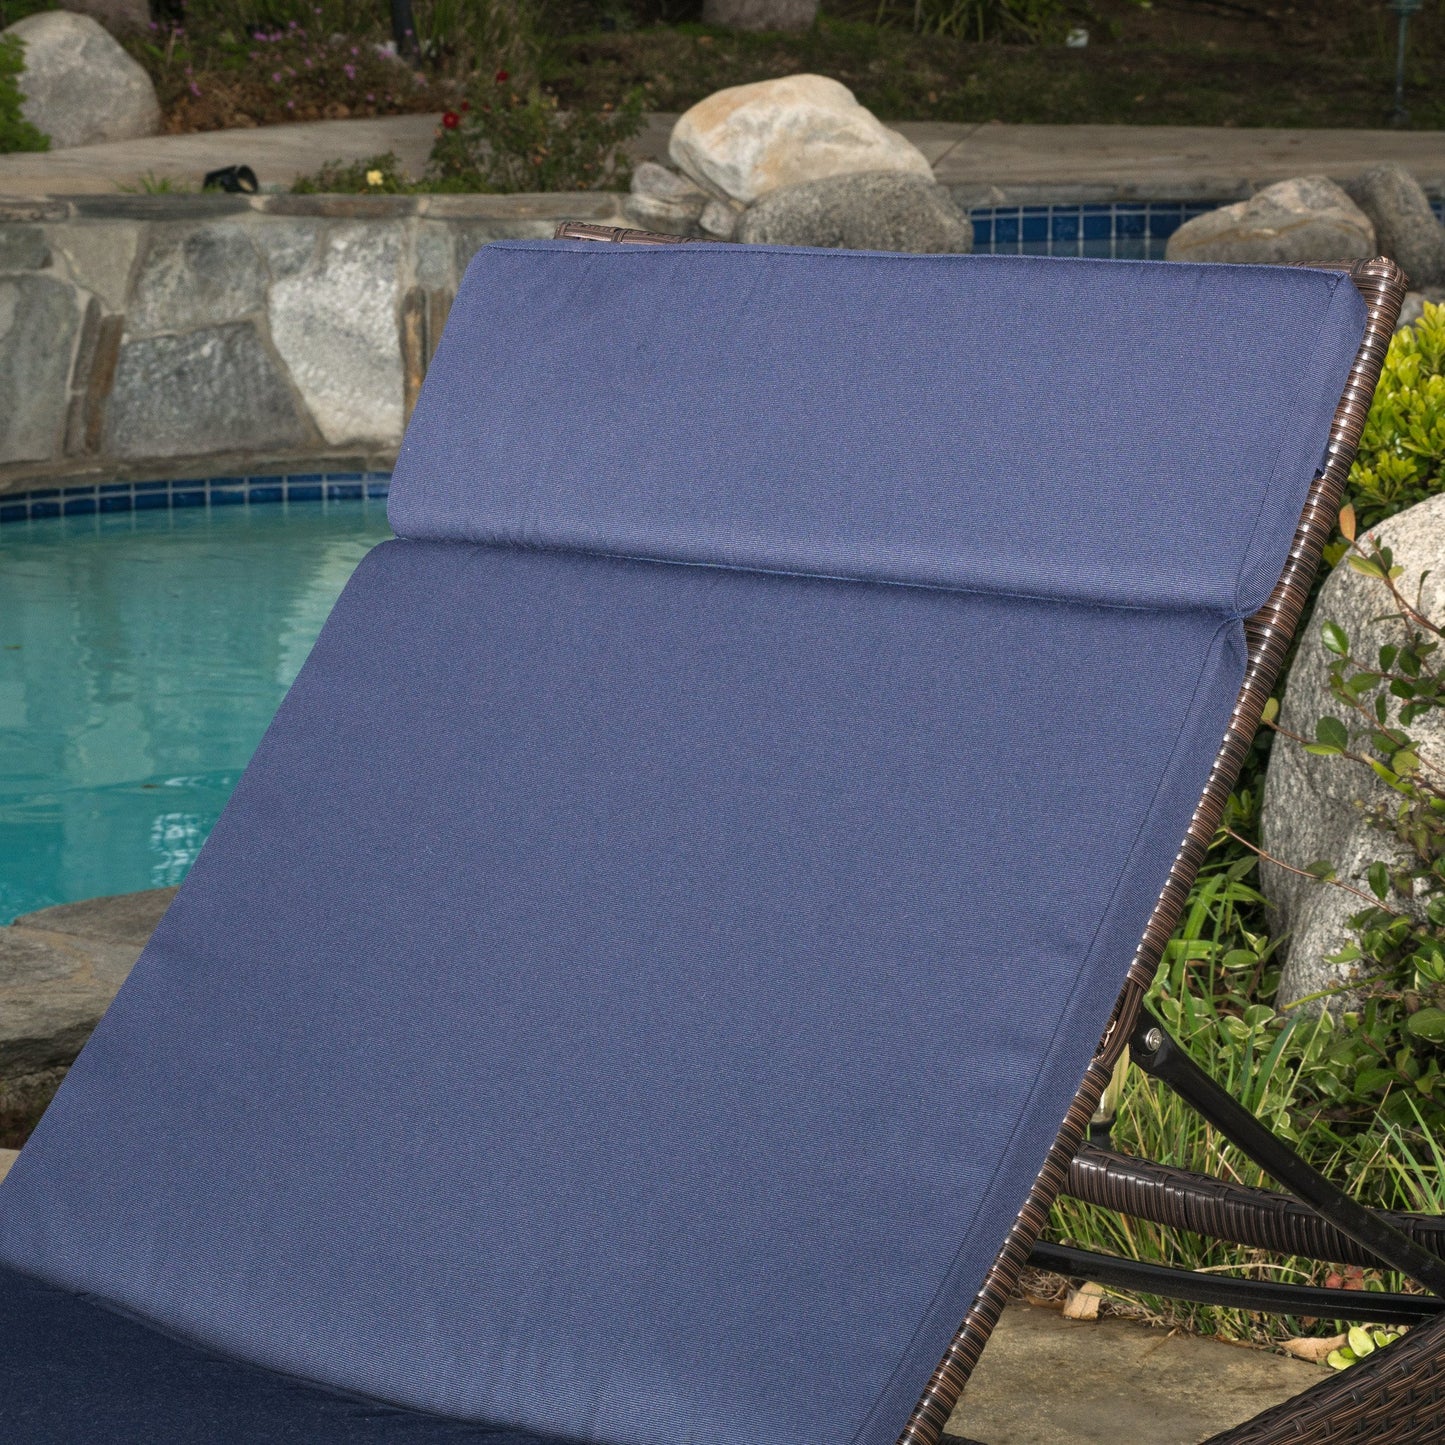 Lakeport Outdoor Adjustable Chaise Lounge Chairs w/ Cushions (set of 2)